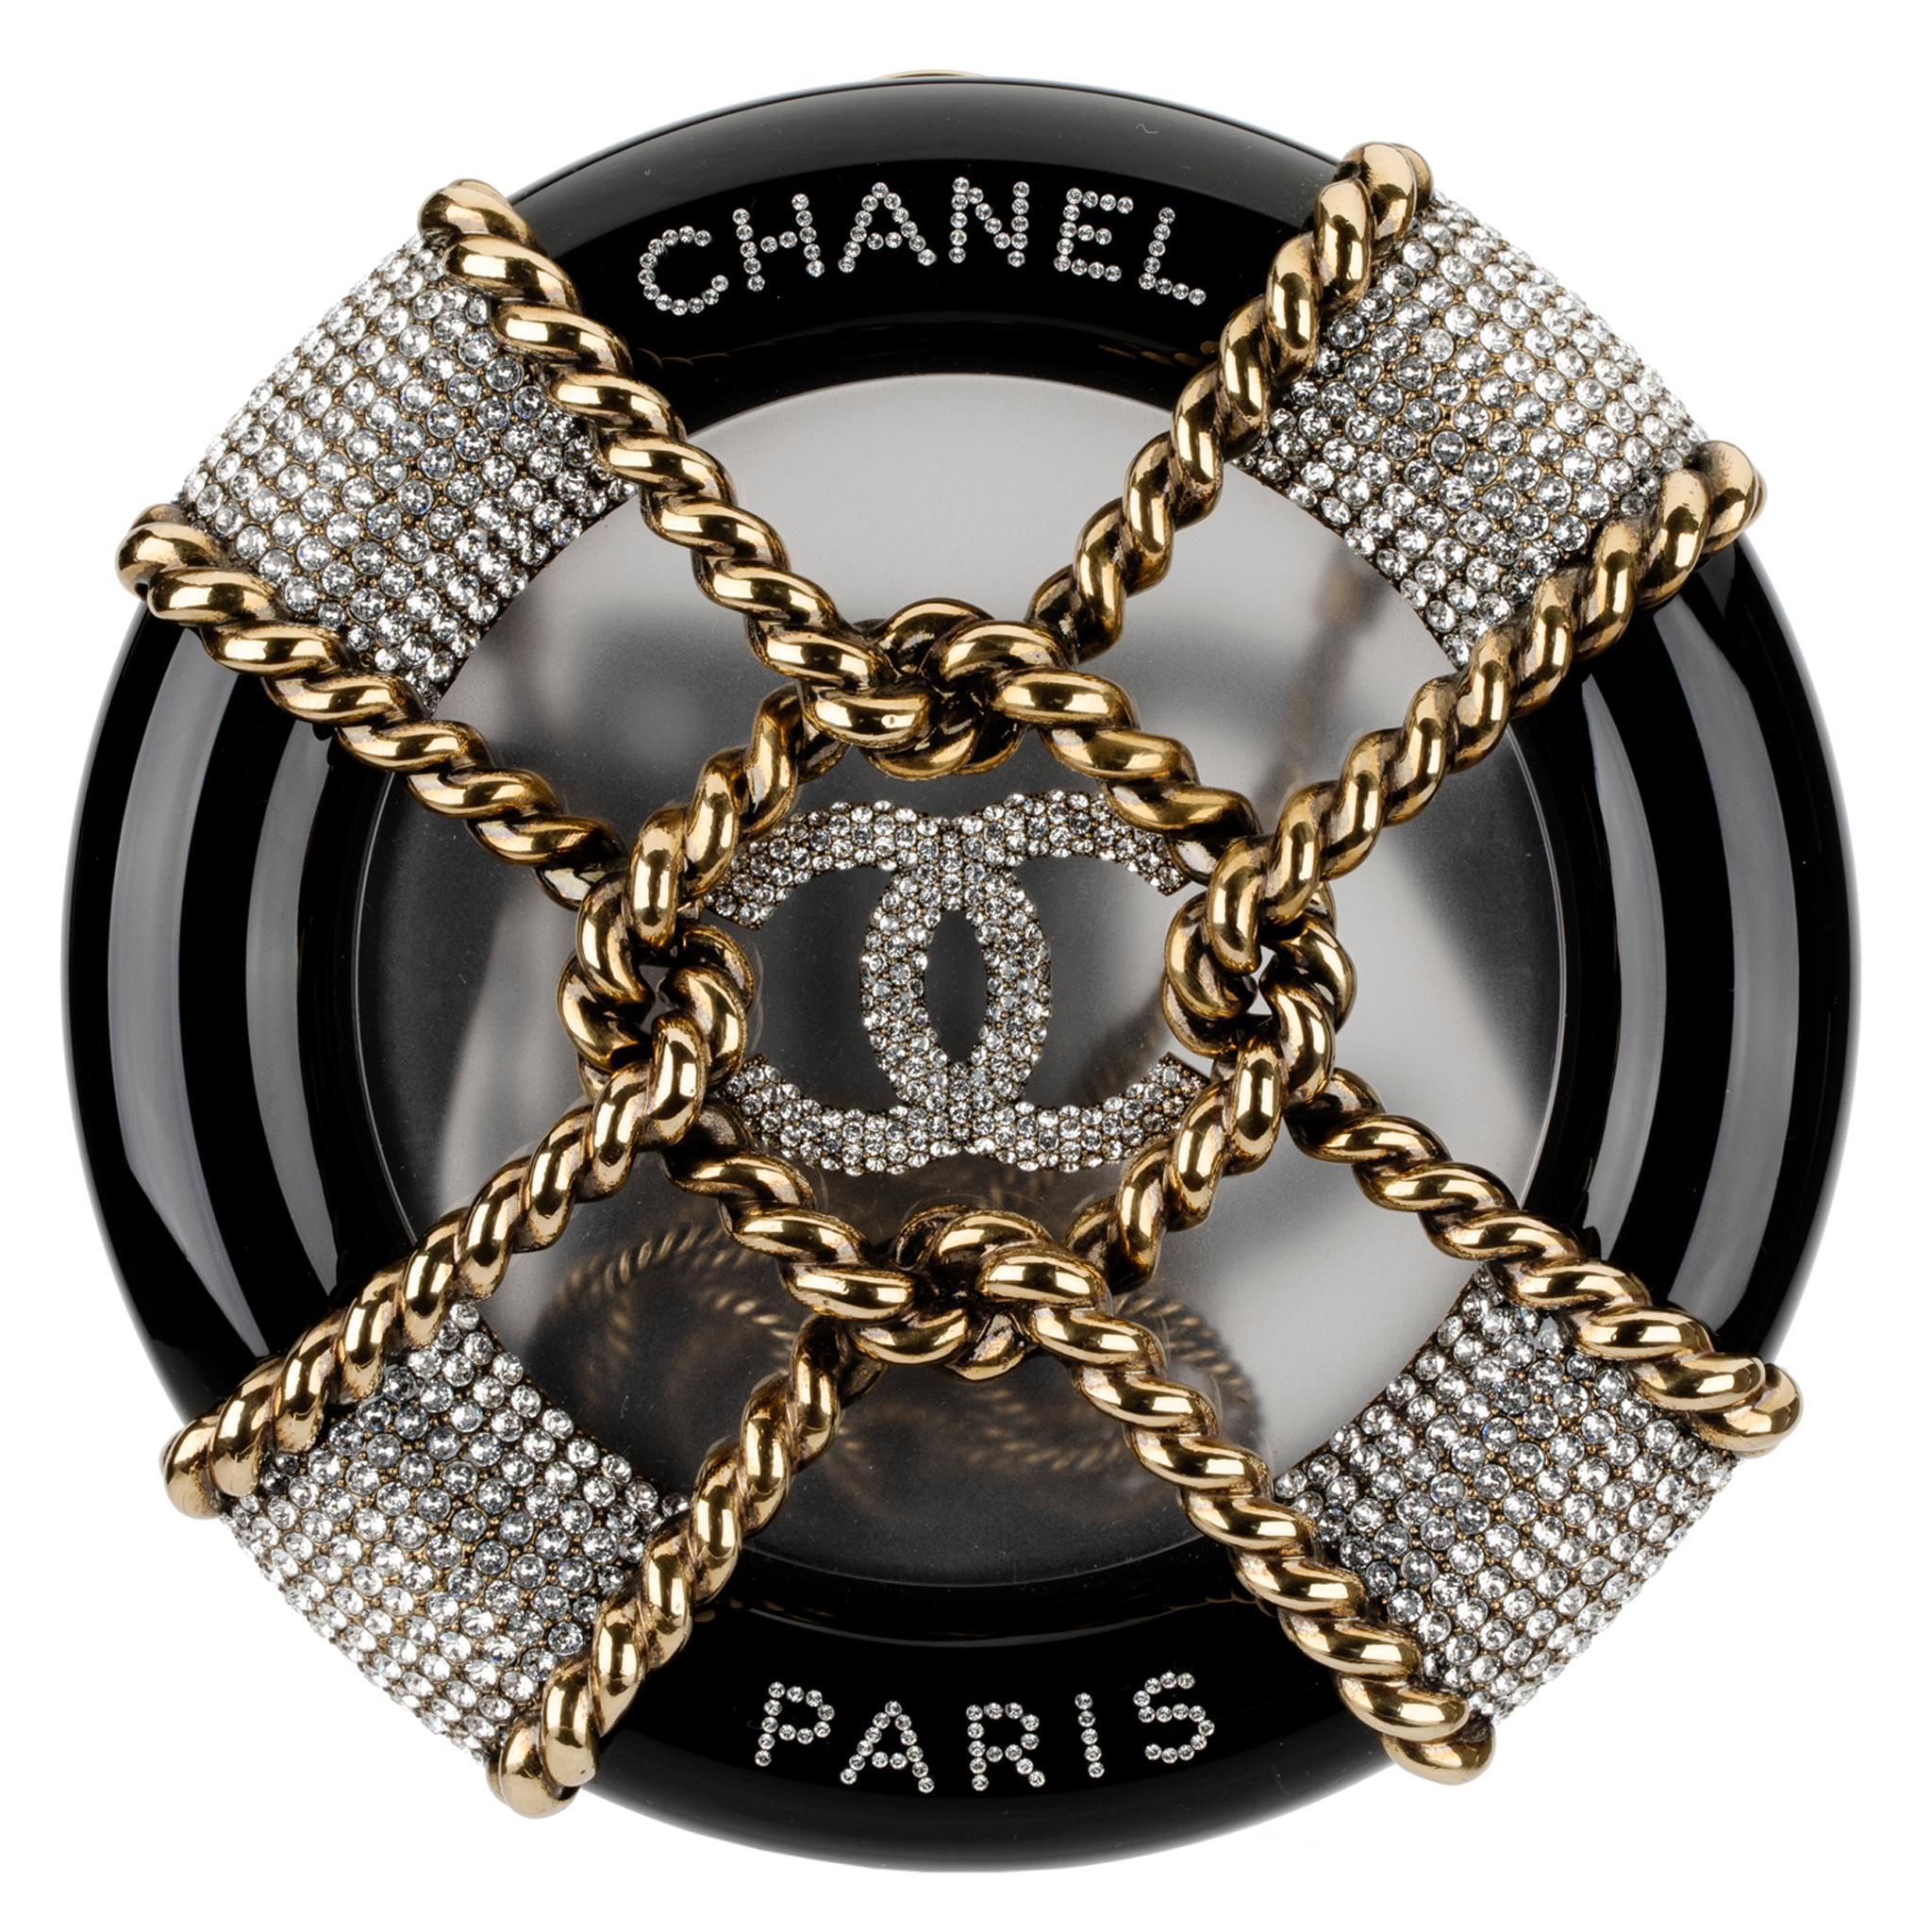 Exclusive Chanel Minaudière Limited Edition Set of 20 14